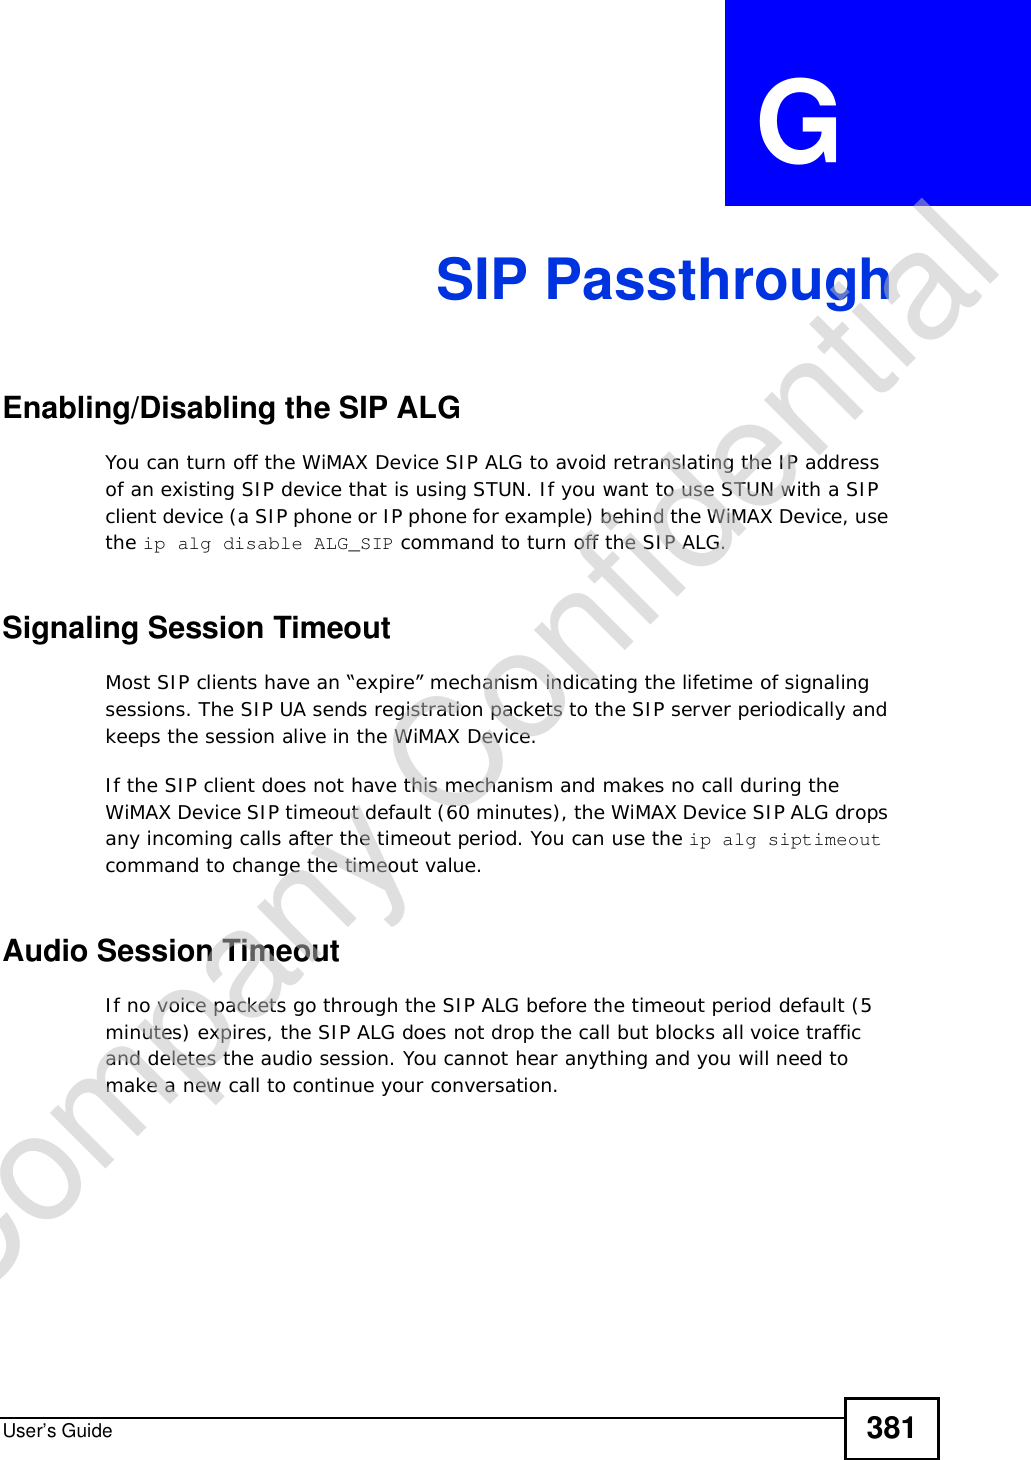 User’s Guide 381APPENDIX  G  SIP PassthroughEnabling/Disabling the SIP ALGYou can turn off the WiMAX Device SIP ALG to avoid retranslating the IP address of an existing SIP device that is using STUN. If you want to use STUN with a SIP client device (a SIP phone or IP phone for example) behind the WiMAX Device, use the ip alg disable ALG_SIP command to turn off the SIP ALG.Signaling Session TimeoutMost SIP clients have an “expire” mechanism indicating the lifetime of signaling sessions. The SIP UA sends registration packets to the SIP server periodically and keeps the session alive in the WiMAX Device. If the SIP client does not have this mechanism and makes no call during the WiMAX Device SIP timeout default (60 minutes), the WiMAX Device SIP ALG drops any incoming calls after the timeout period. You can use the ip alg siptimeout command to change the timeout value.Audio Session TimeoutIf no voice packets go through the SIP ALG before the timeout period default (5 minutes) expires, the SIP ALG does not drop the call but blocks all voice traffic and deletes the audio session. You cannot hear anything and you will need to make a new call to continue your conversation.Company Confidential